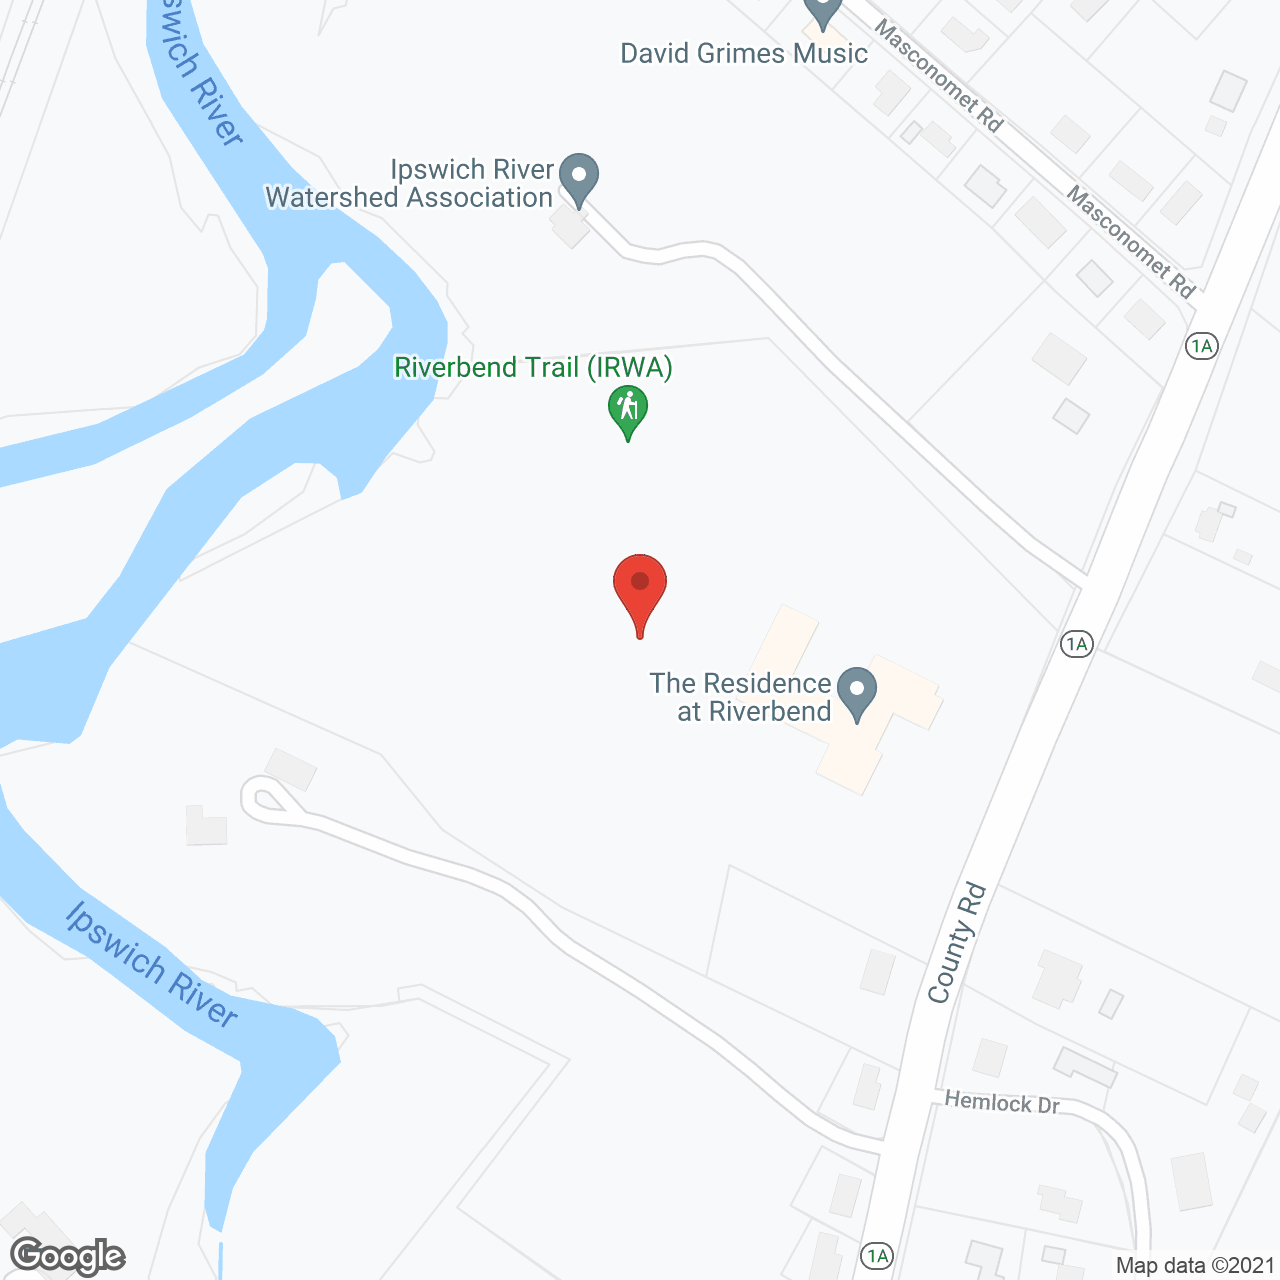 The Residence at Riverbend in google map